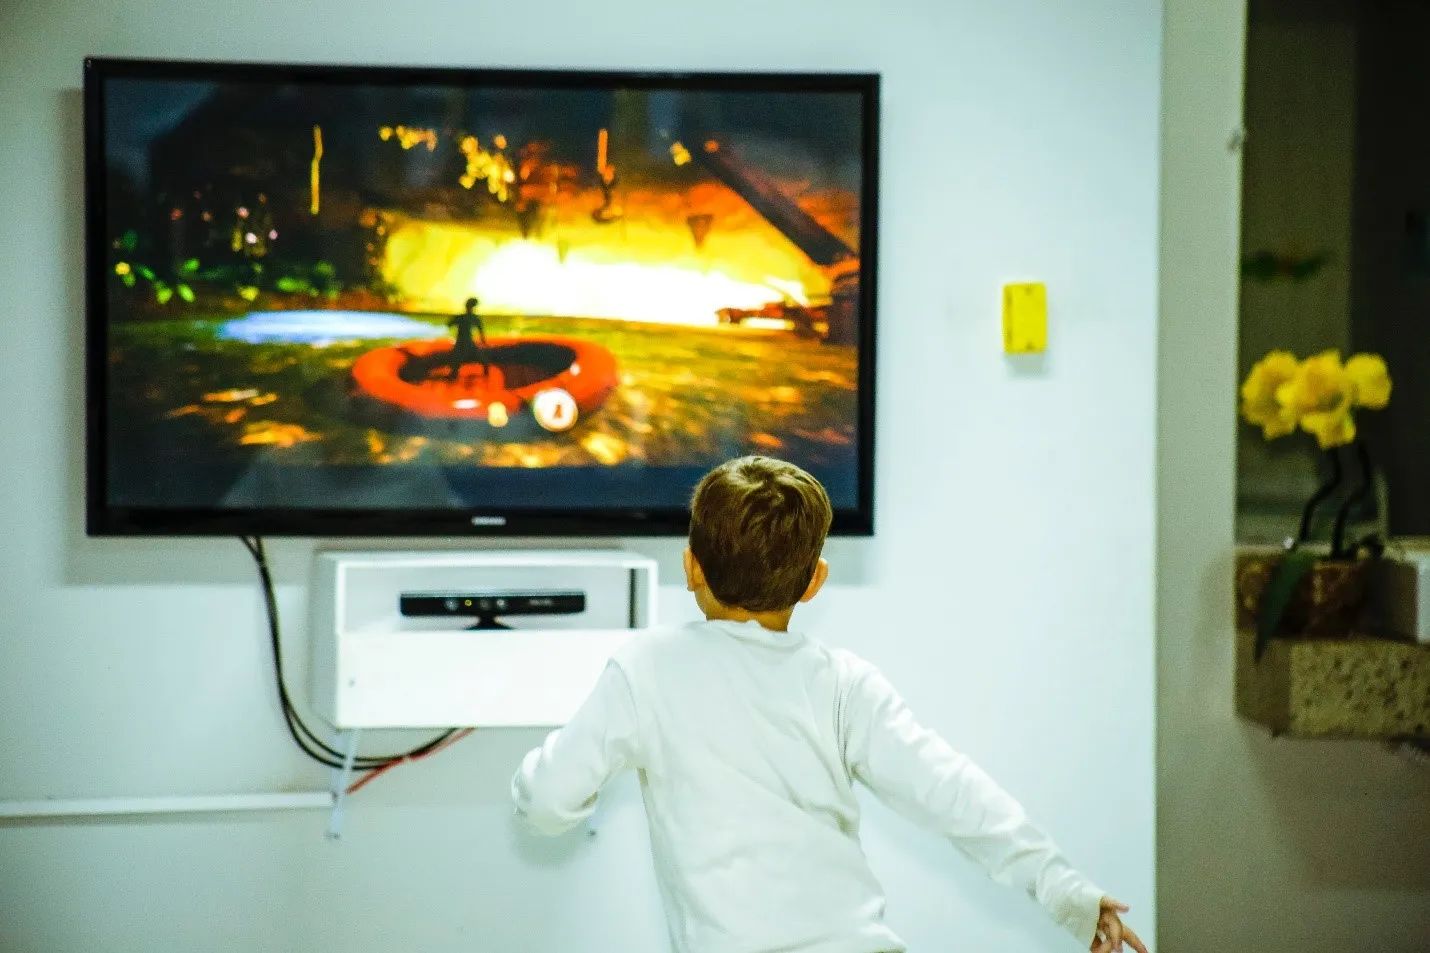 What Are The Disadvantages Of Smart TV